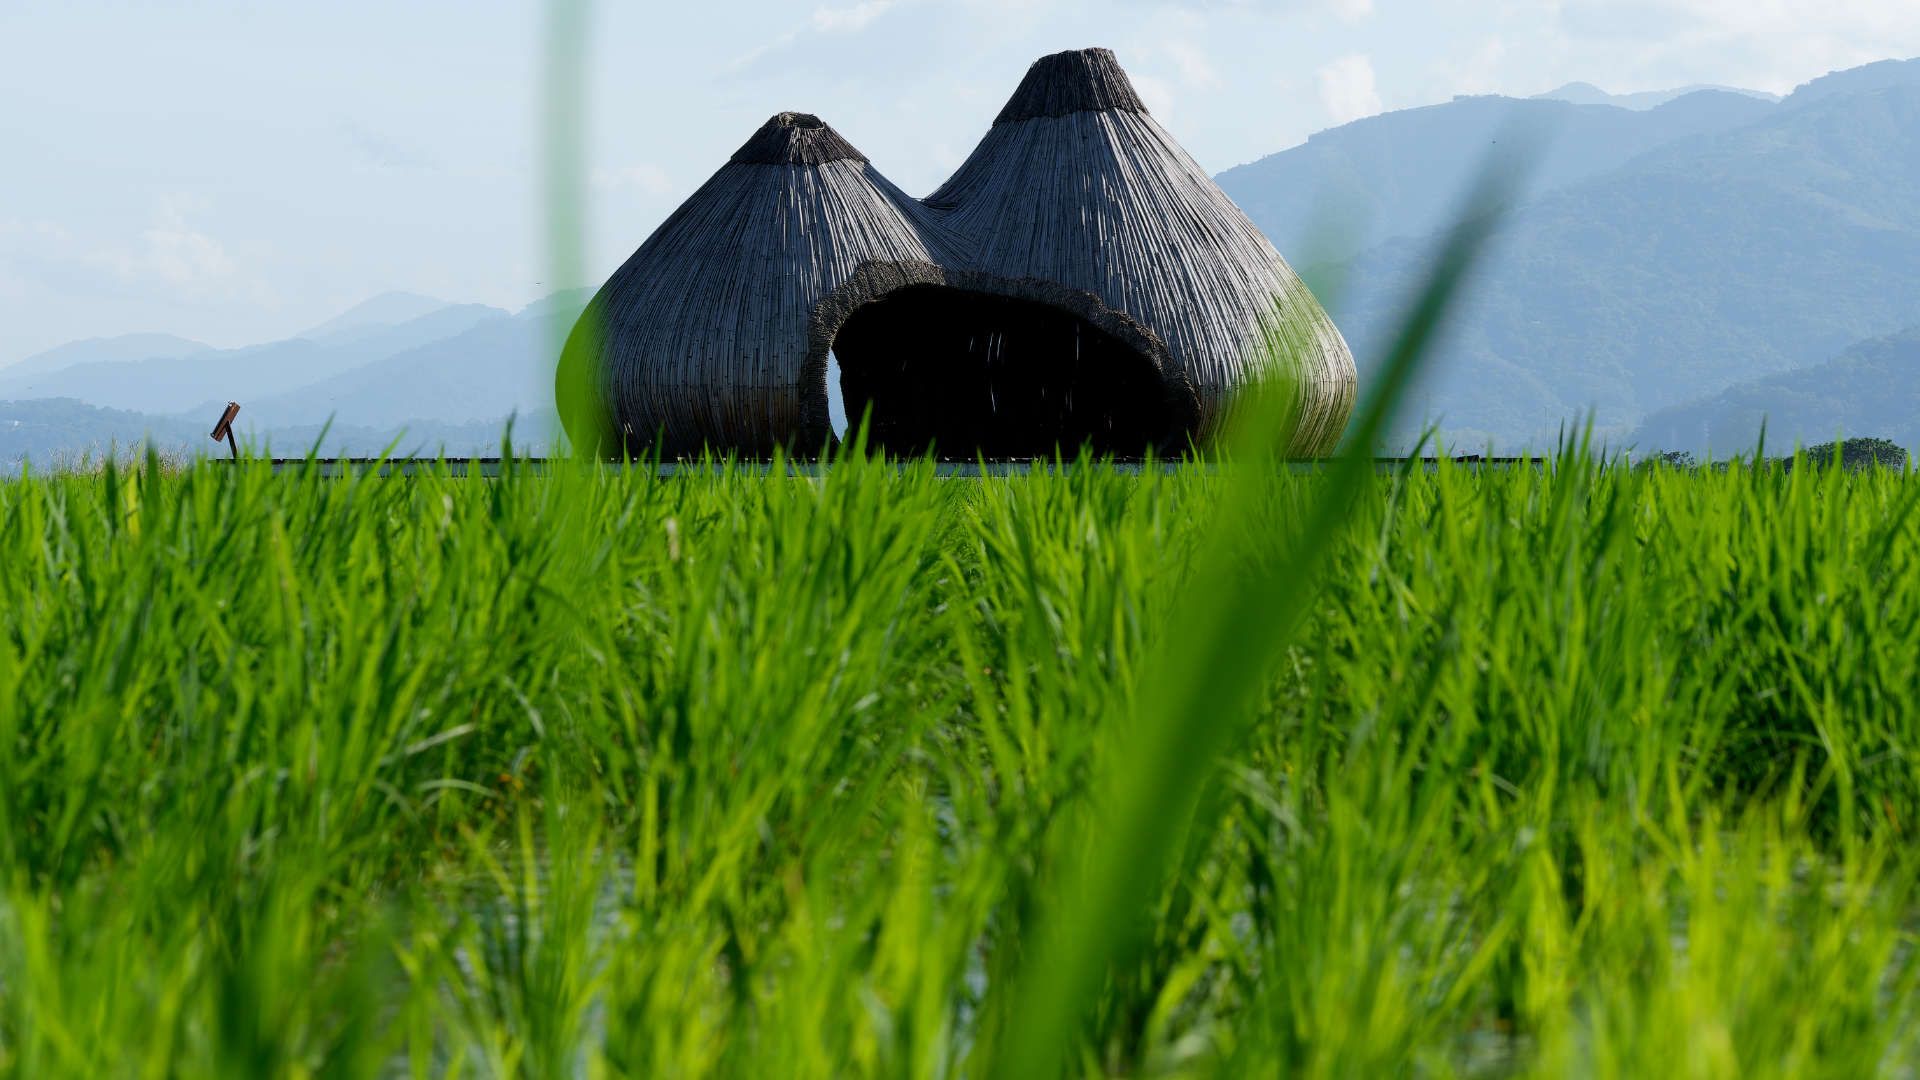 A bamboo sculpture in the shape of two garlic bulbs, photographed across a rice field. The sculpture is large enough to sit inside. It is on a raised wooden platform.